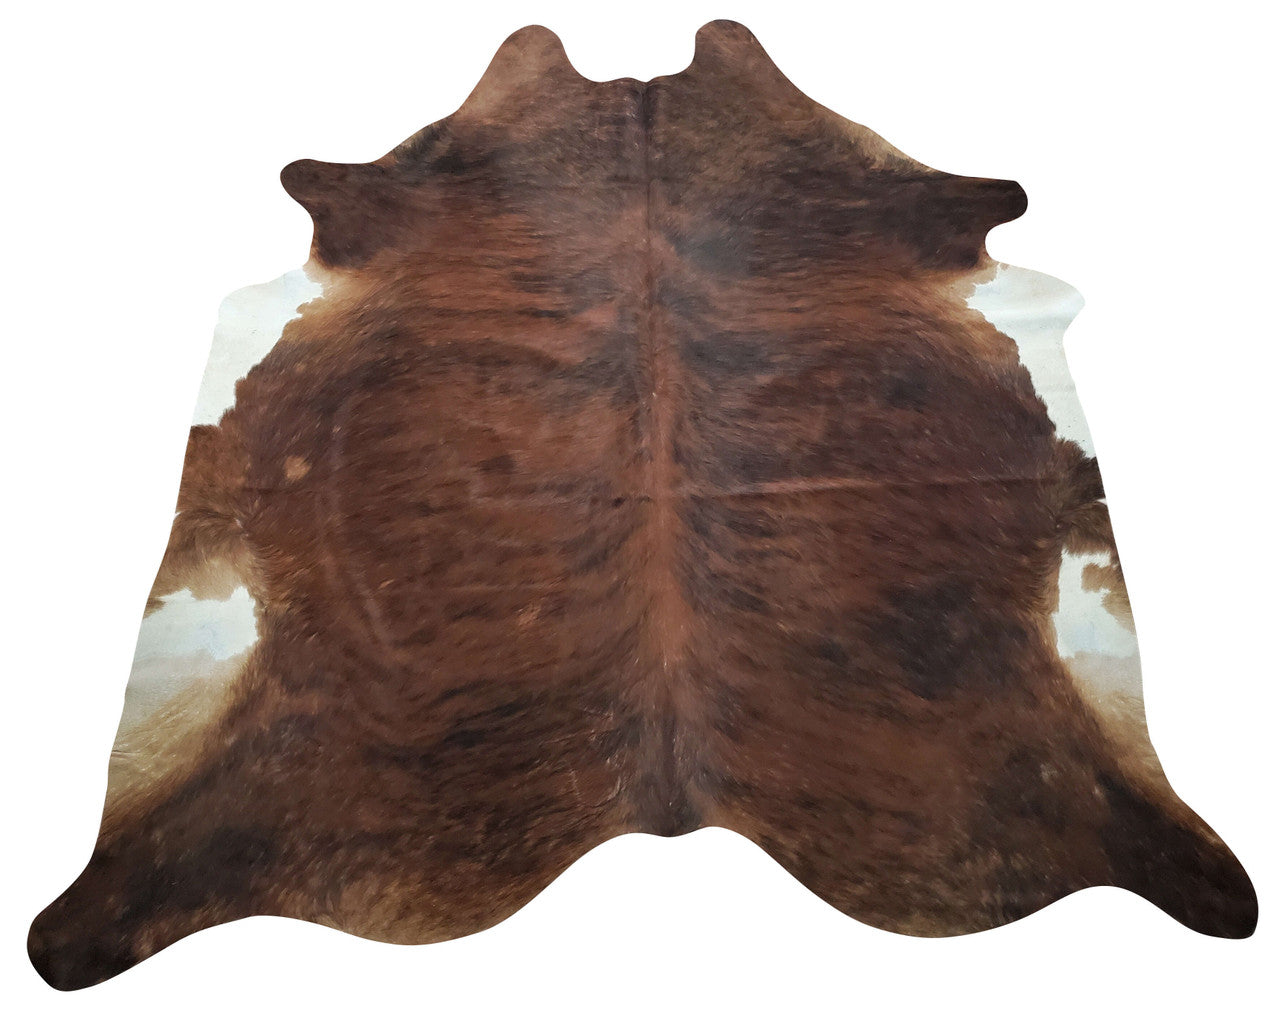 Fast shipping and lovely, authentic, aesthetic and real, this brindle cowhide rug is one of a kind.

